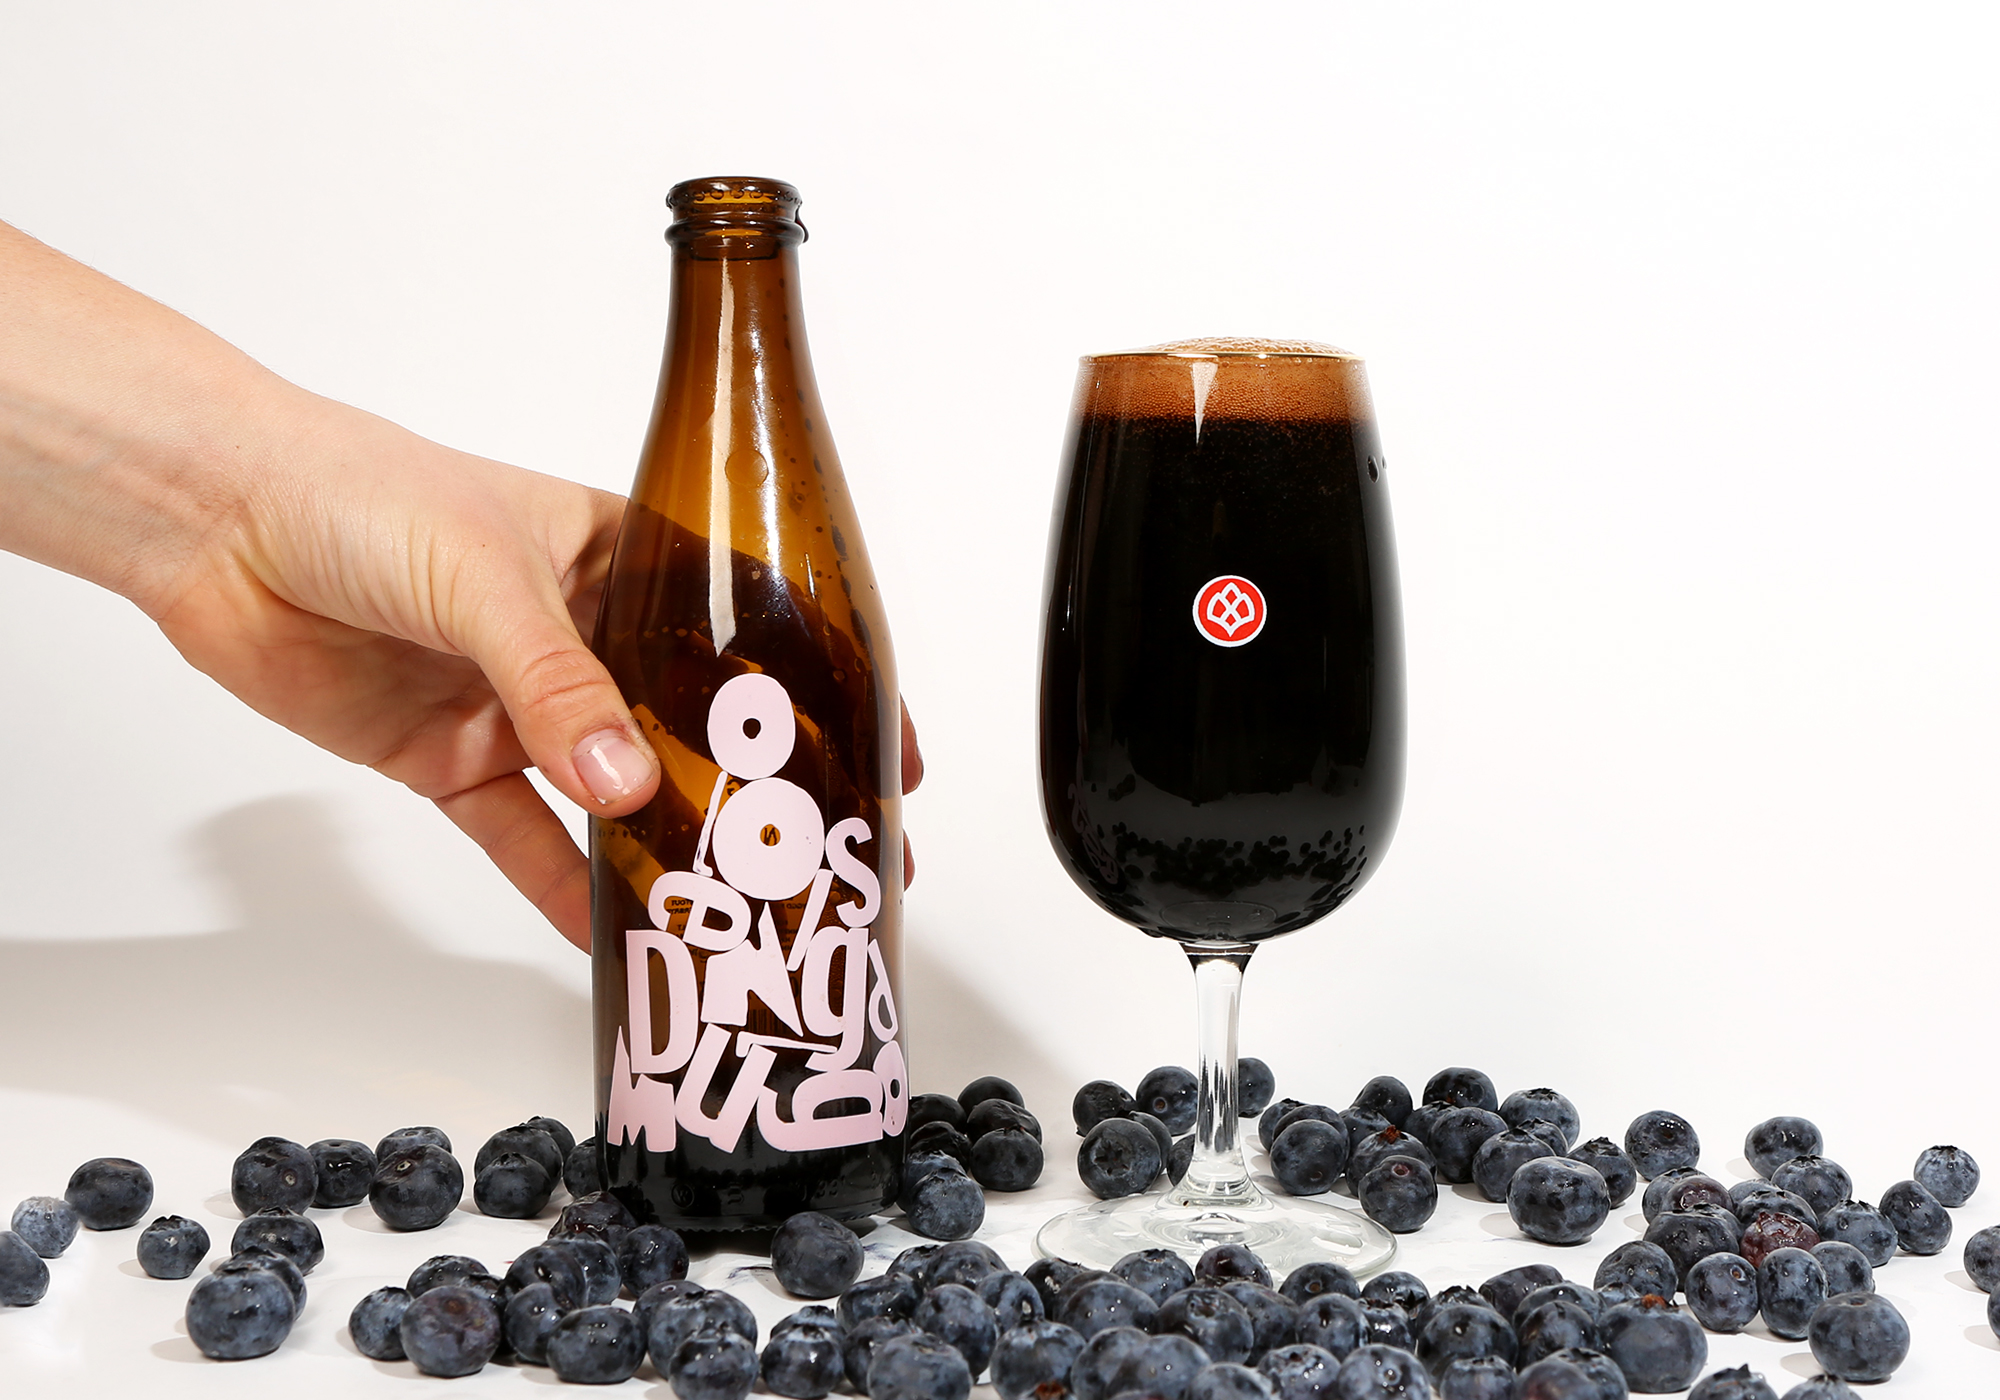 A Review of Anagram, a Blueberry Cheesecake Pastry Stout from Omnipollo and Dugges